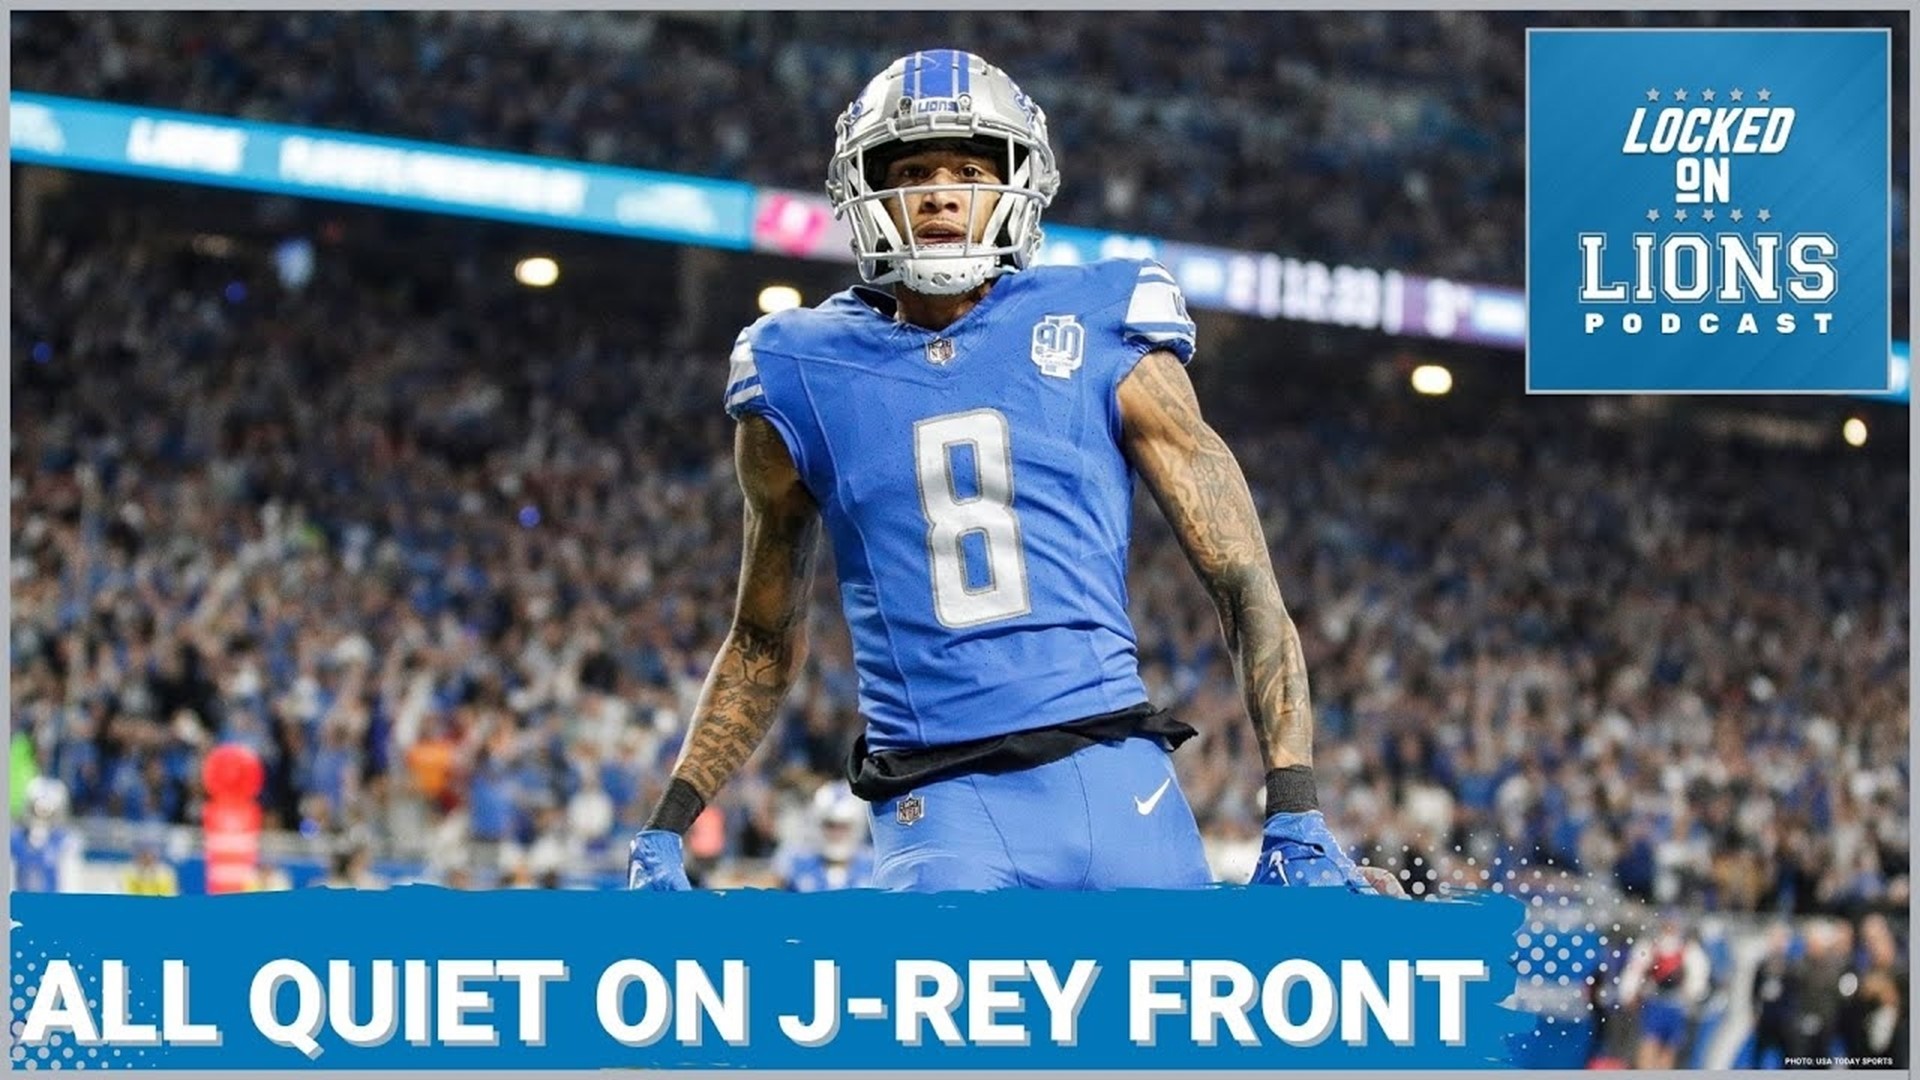 What will the Detroit Lions do with free agent WR Josh Reynolds? We are five days into free agency and there has been no movement with J-Rey.